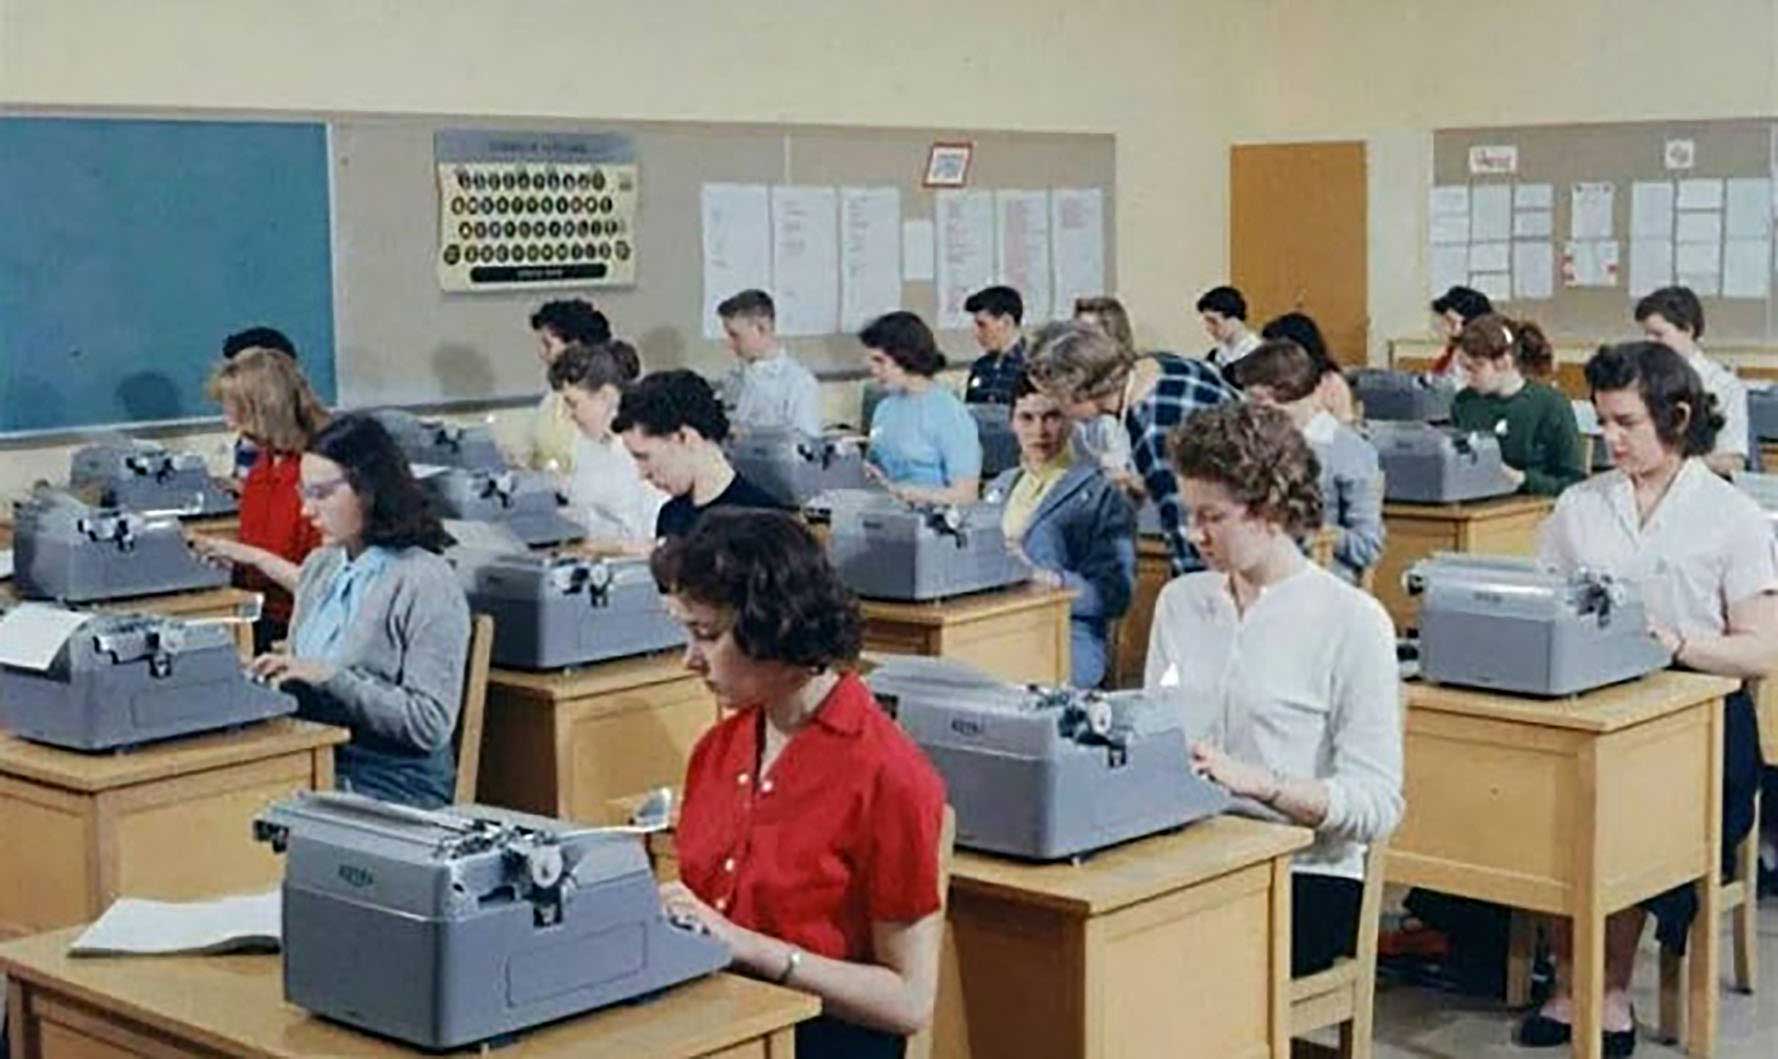 Keyboarding classes were offered at most public school